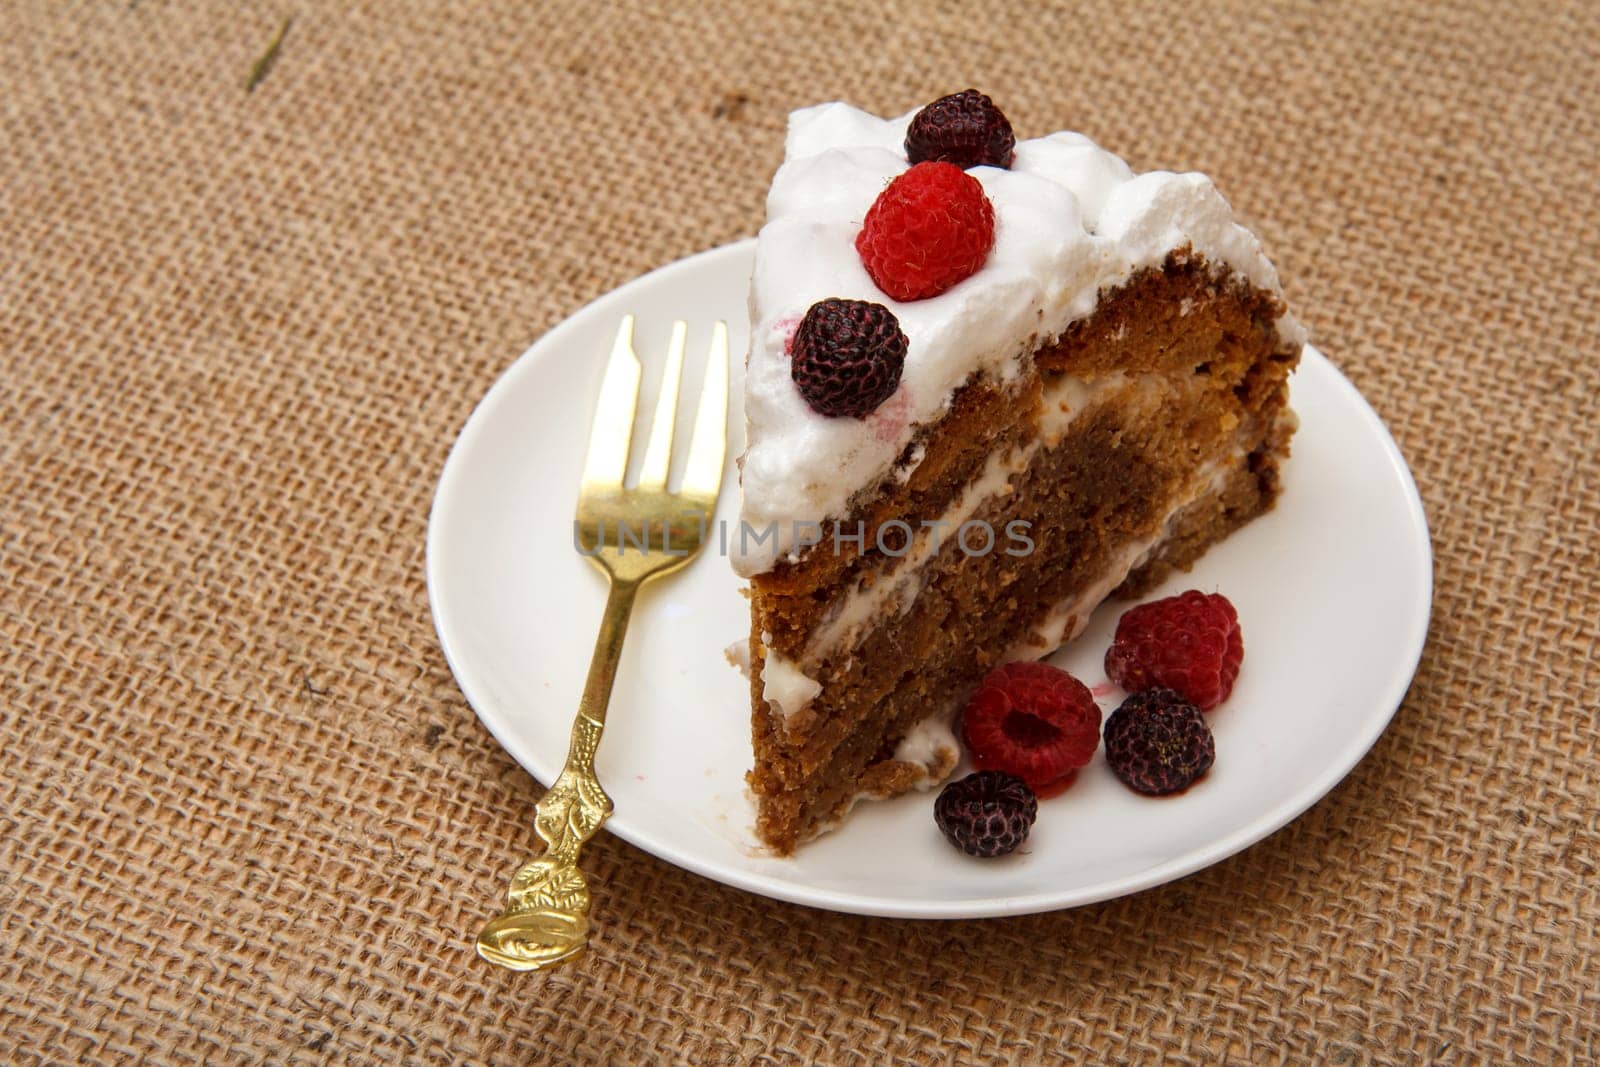 Slice of homemade biscuit cake decorated with whipped cream and raspberries on plate with sackcloth background.